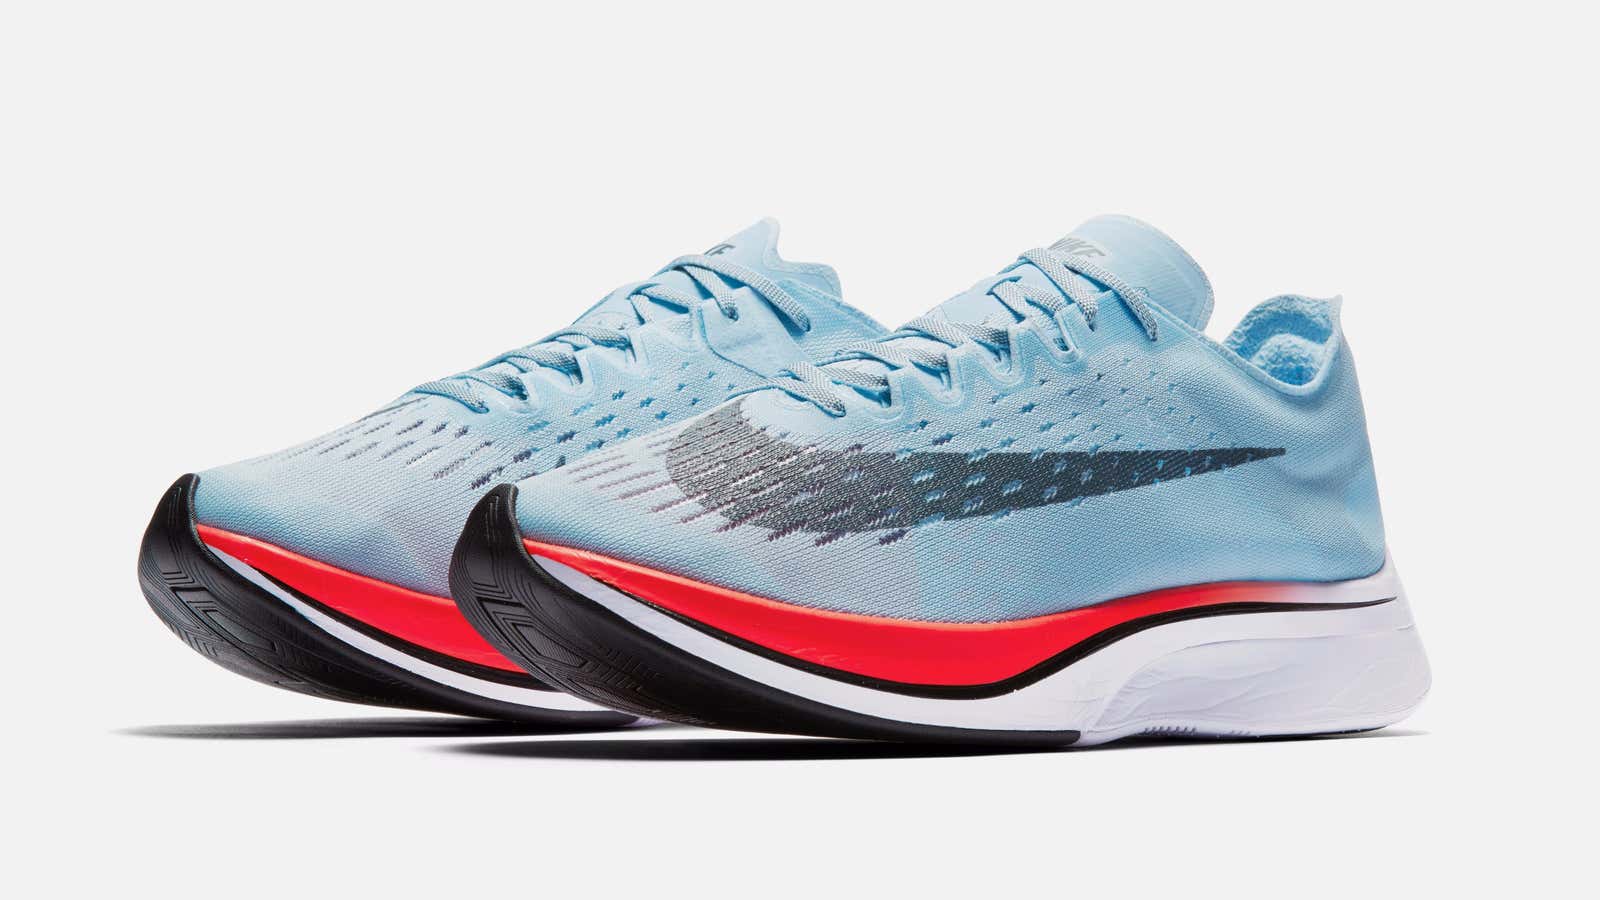 The Nike Zoom Vaporfly 4%.